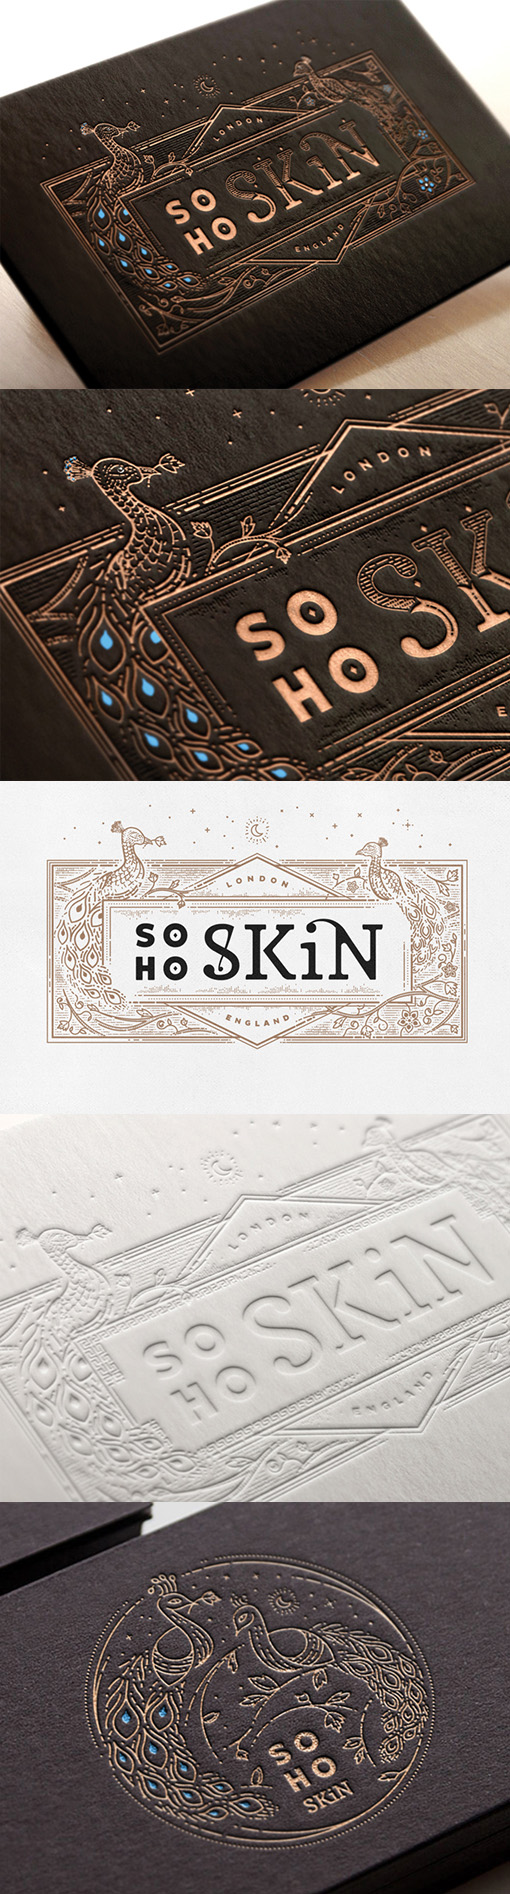 Beautiful Hand Drawn Illustration On A Black And Gold Letterpress Business Card